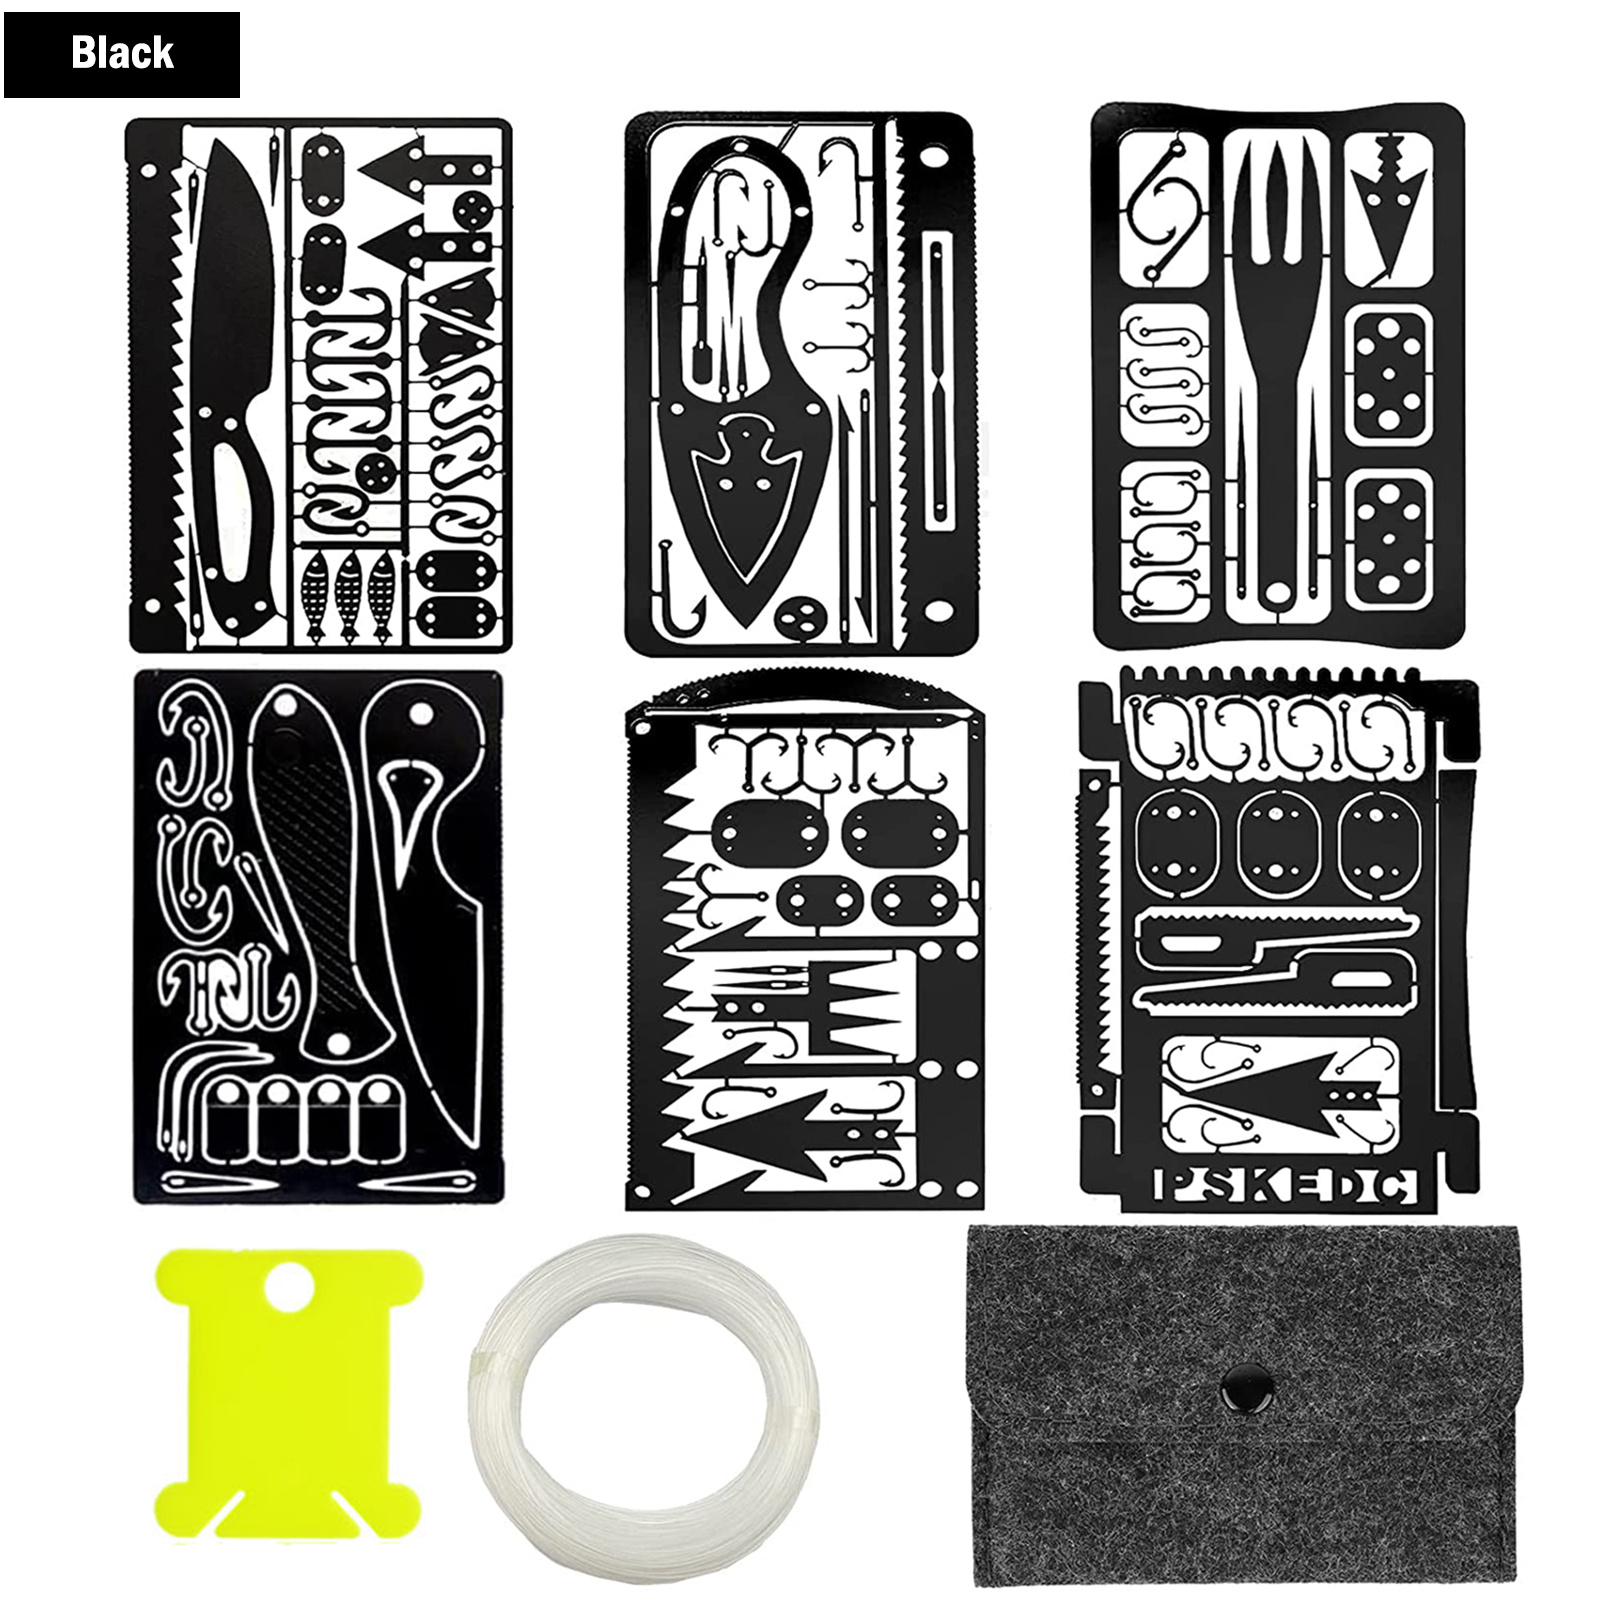 6 Piece Survival Card Multitool Edc Kit For Fishing Outdoor Hiking, Today's Best Daily Deals